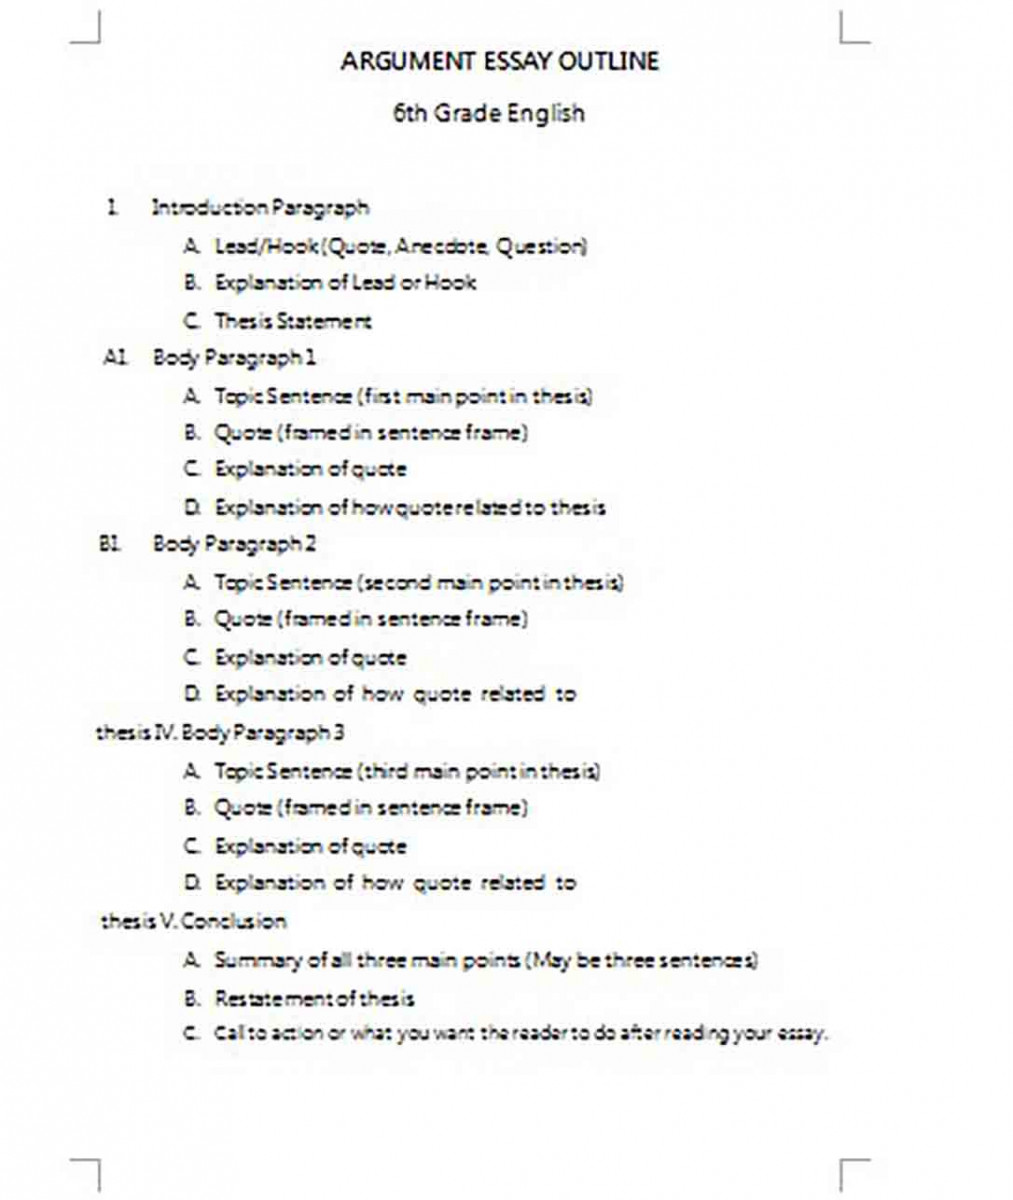 Example of a Argument Essay Outline